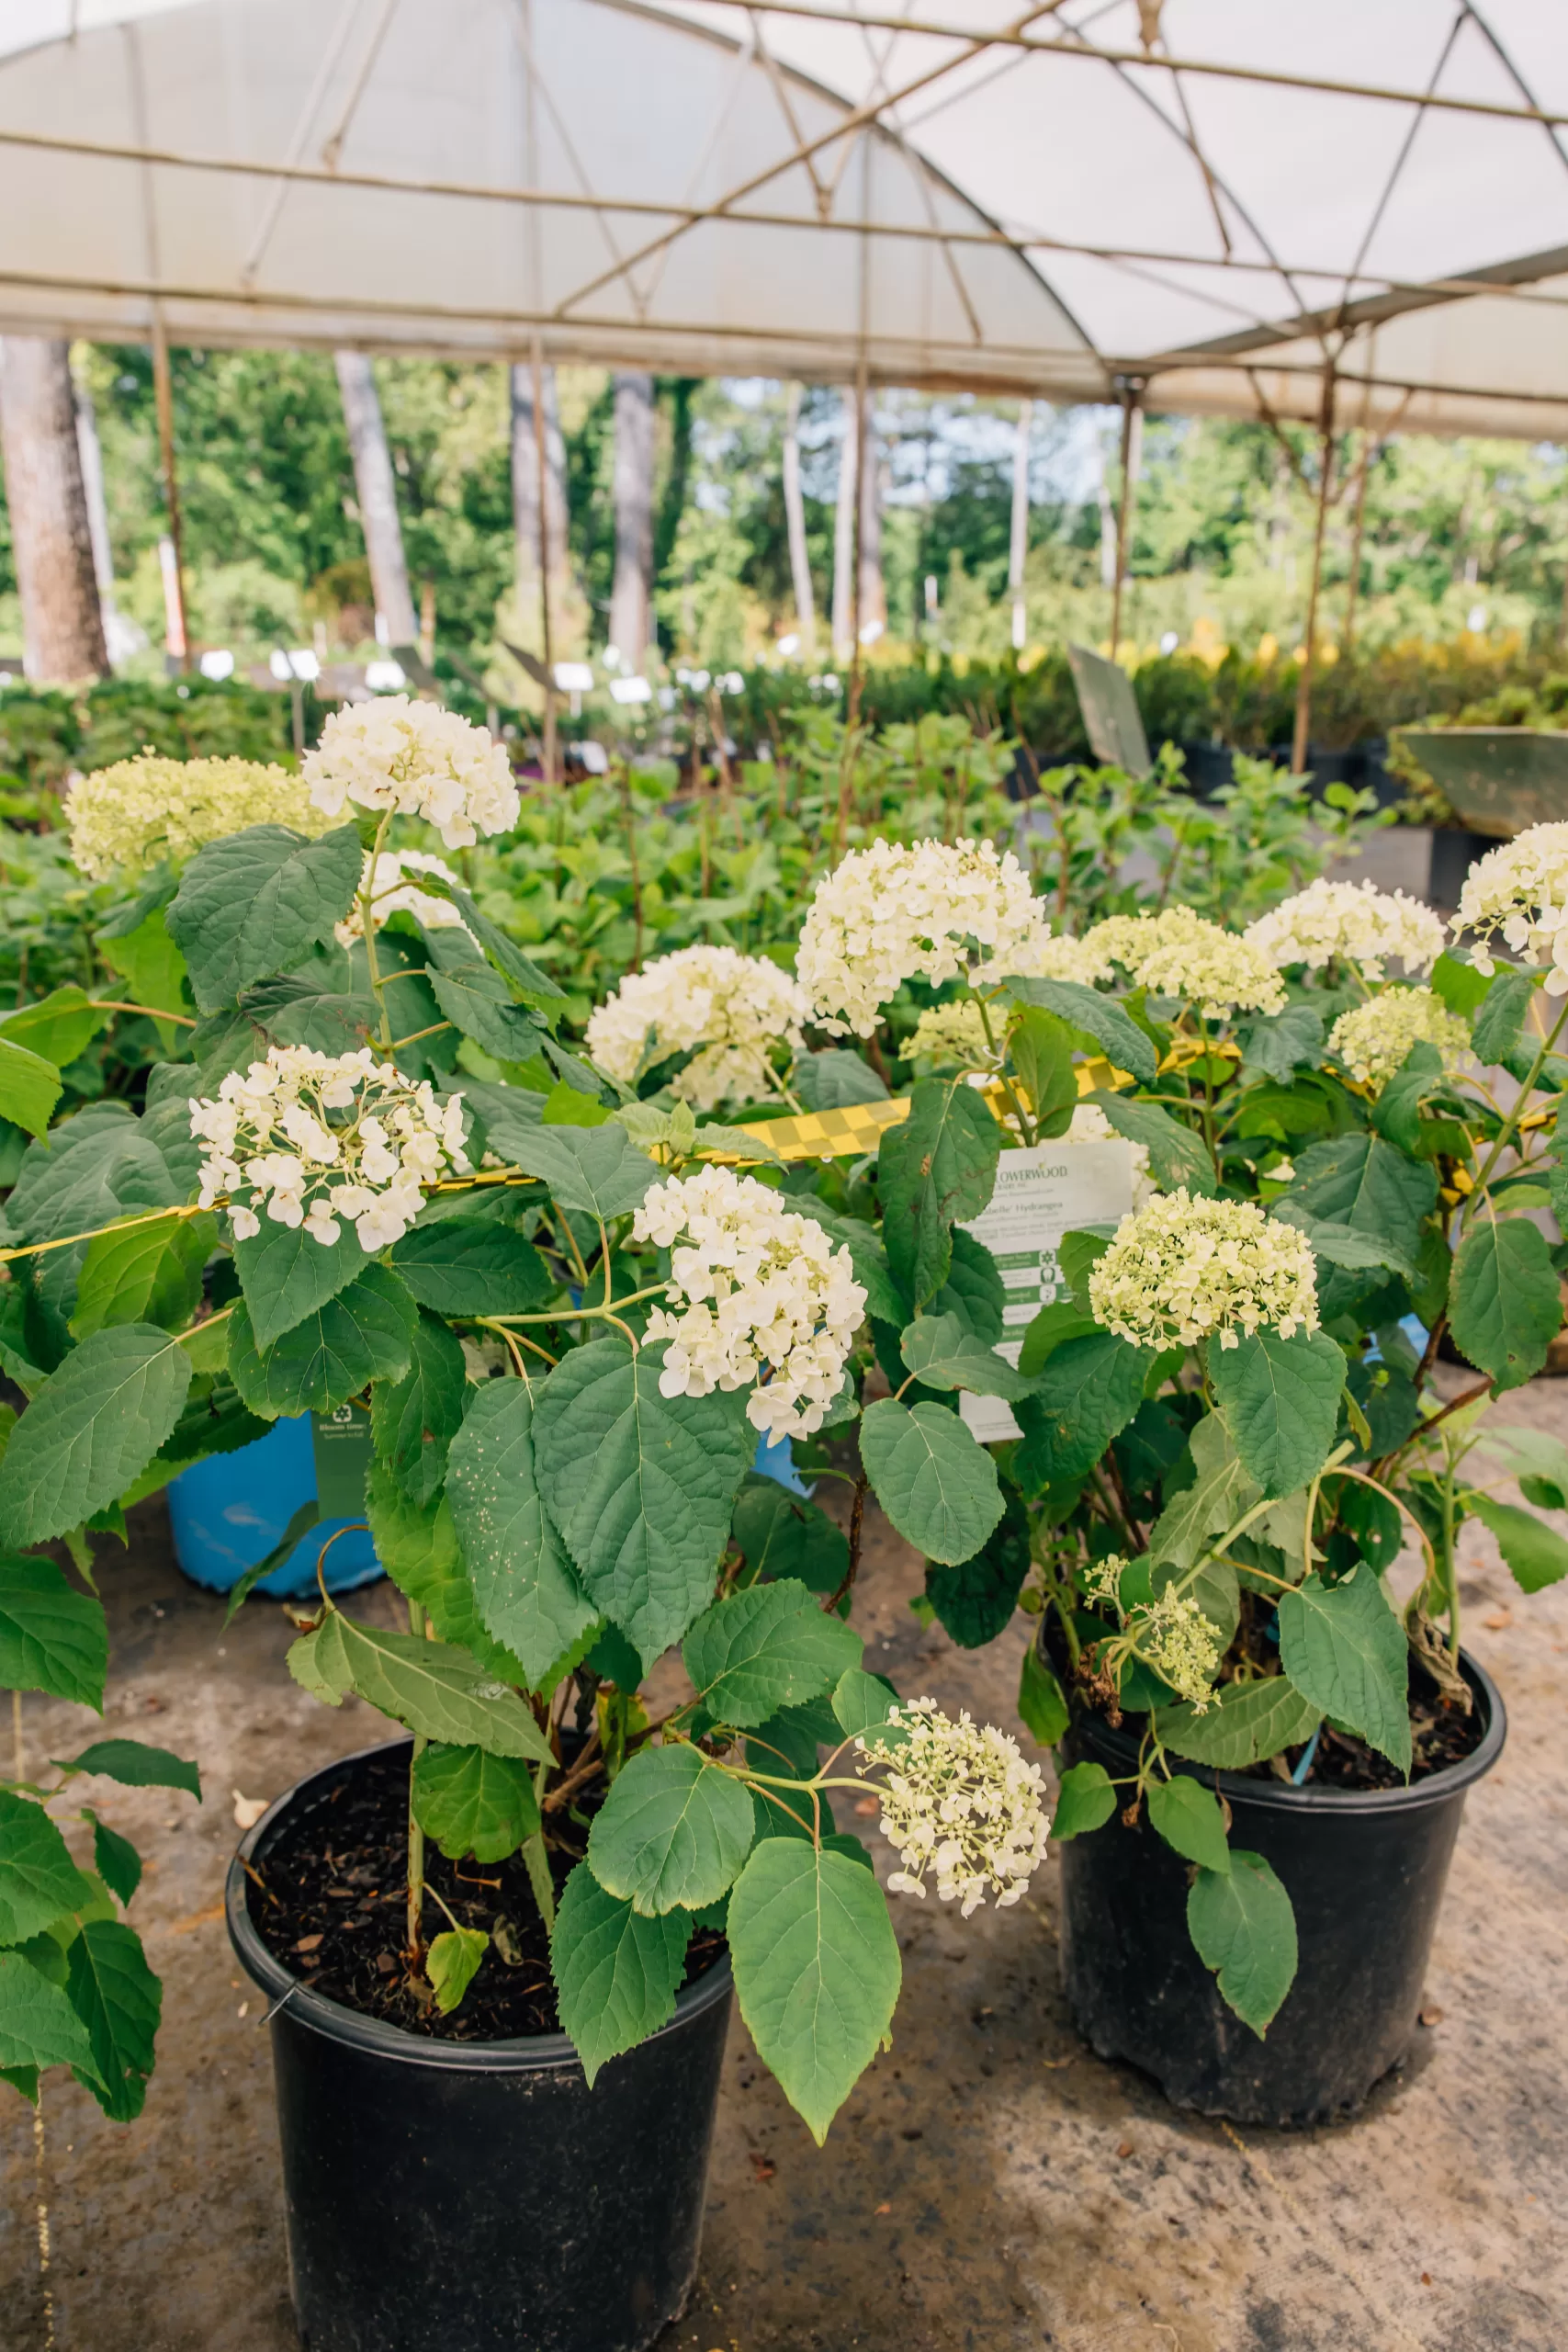 Indian Creek Wholesale Nursery in Madison: If you're looking to make changes to your landscaping and work towards creating your own outdoor summer retreat, read on to learn more about summertime planting from the experts at Indian Creek Wholesale Nursery in Madison.